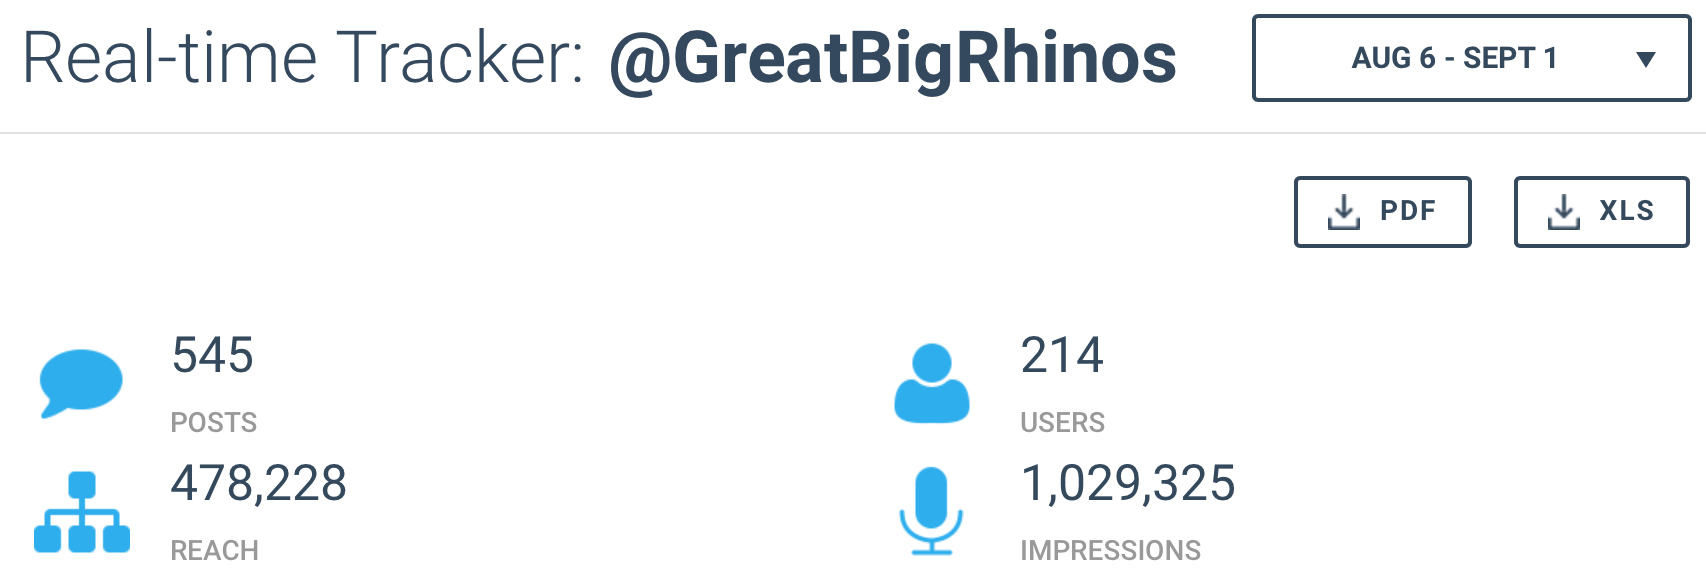 Twitter numbers for @GreatBigRhinos